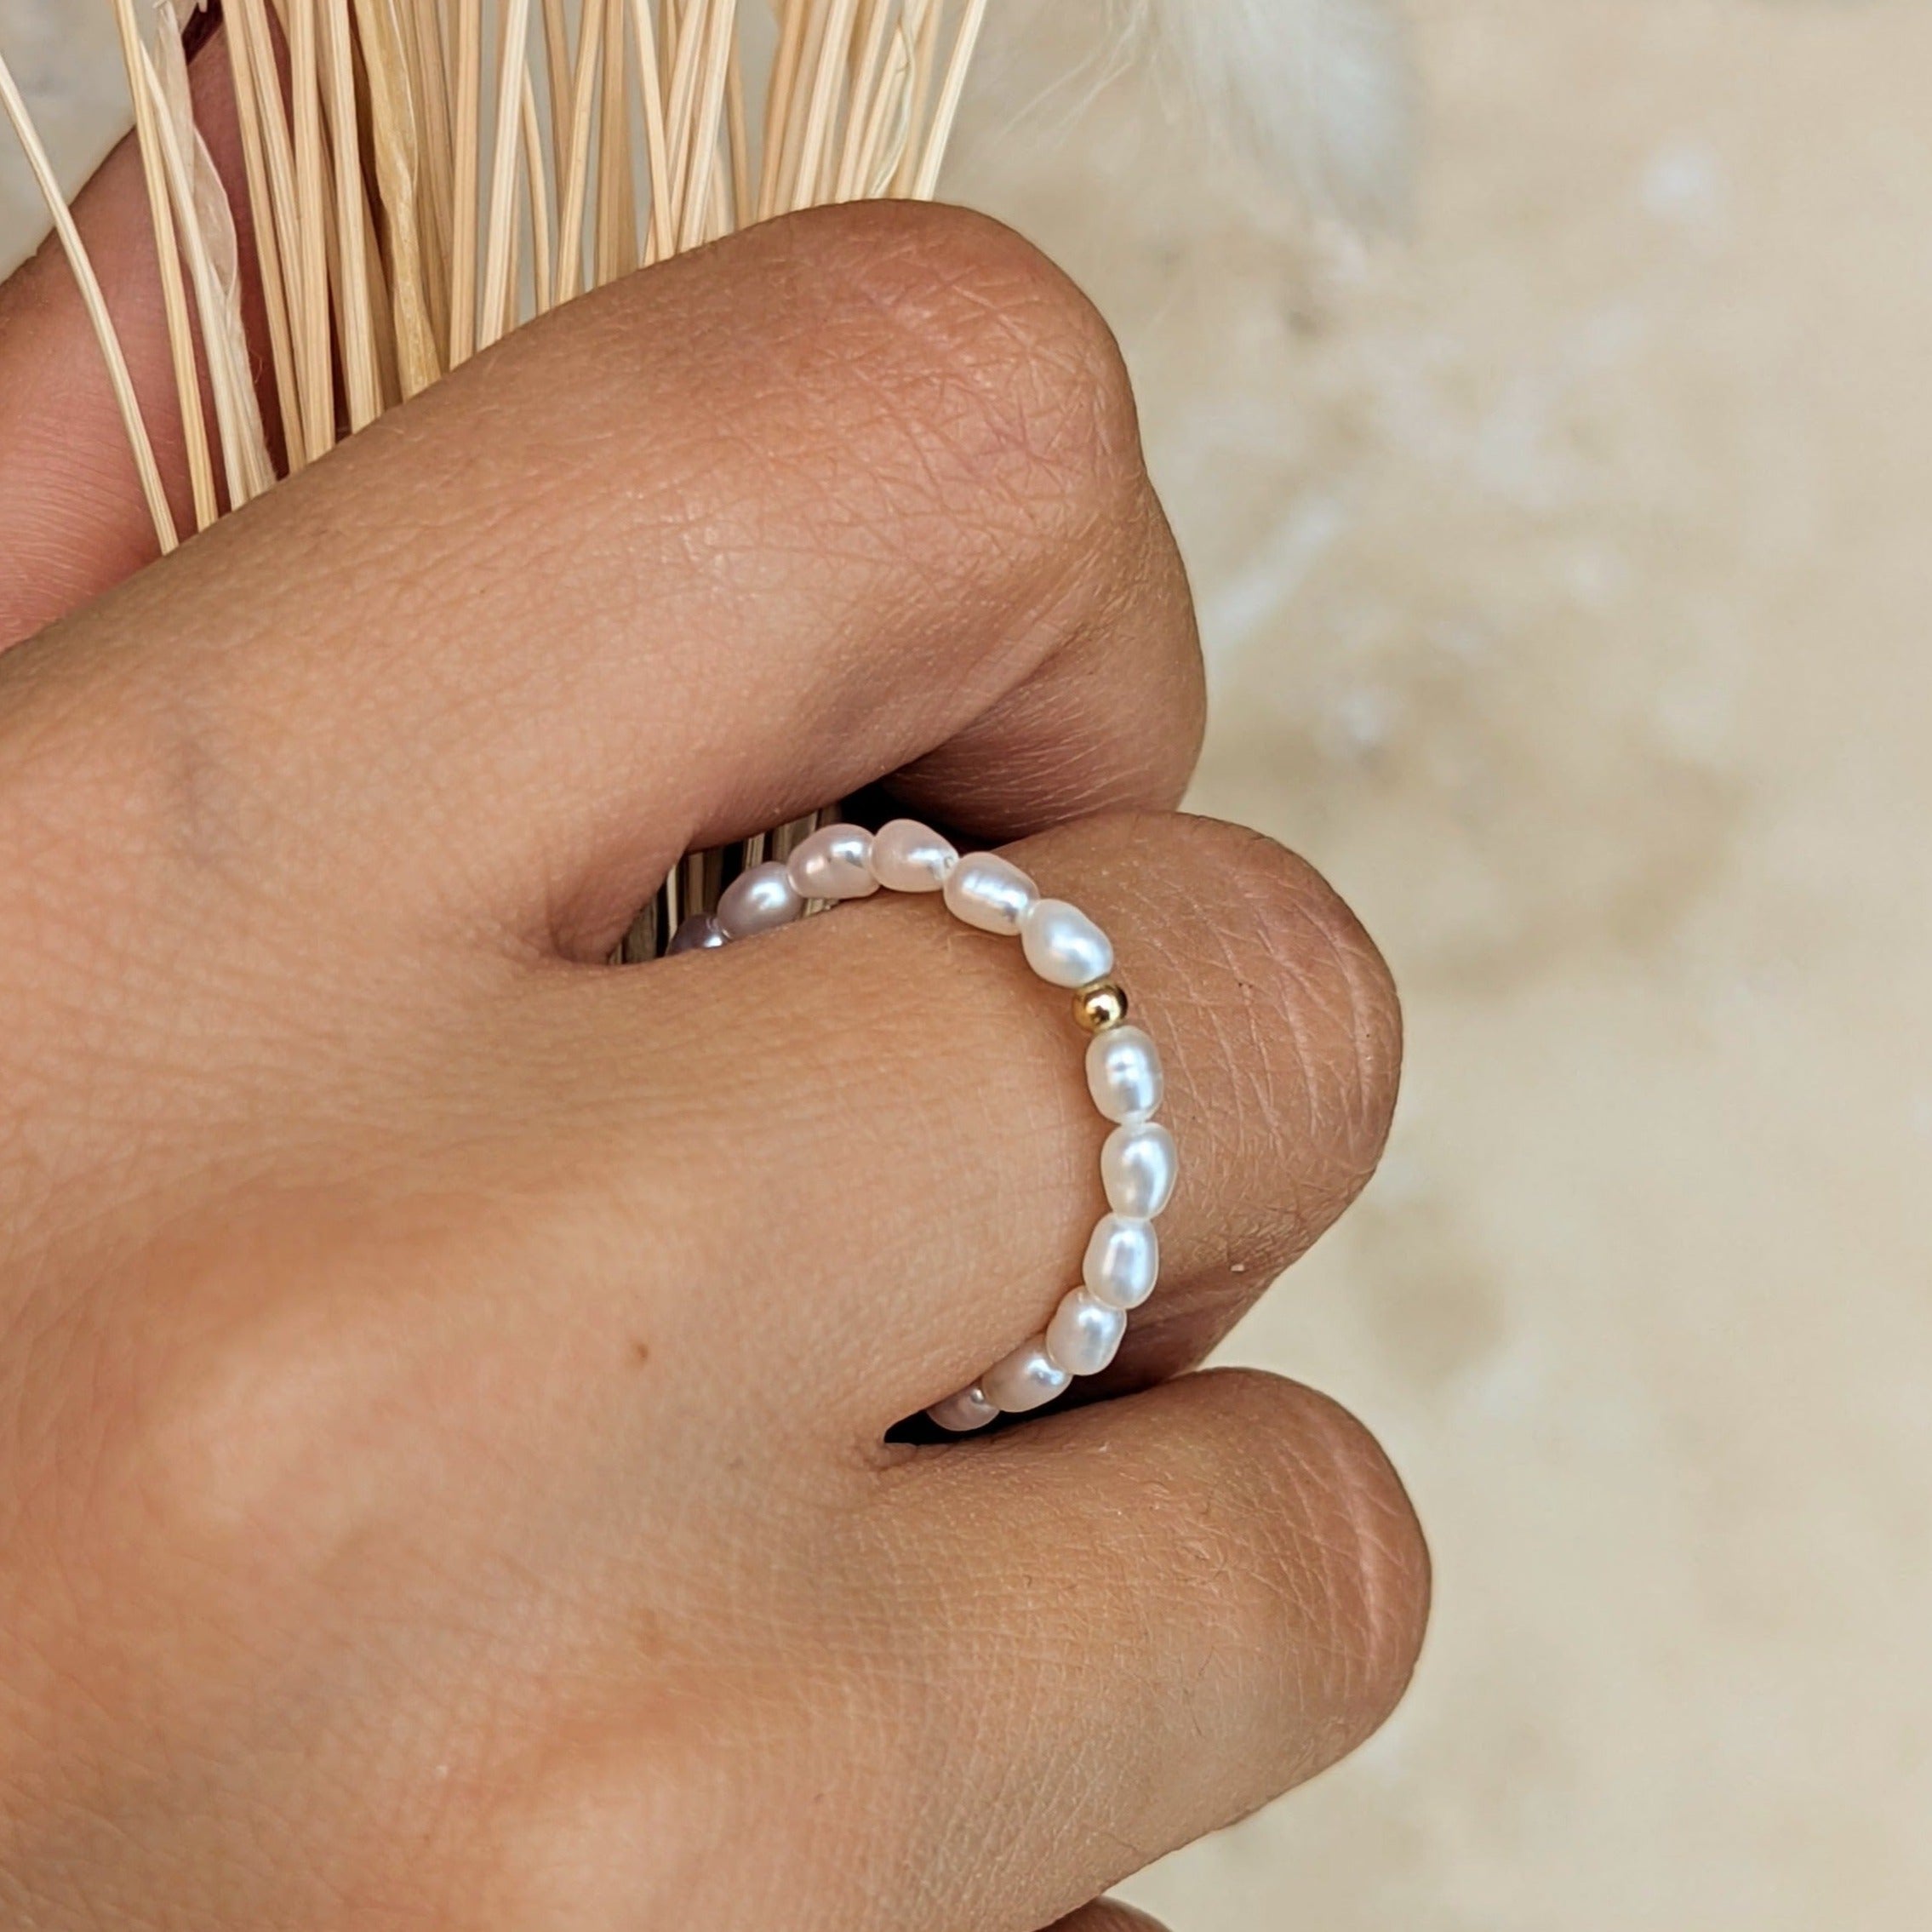 Hand holding dried grass wearing a pearl ring with small gold bead